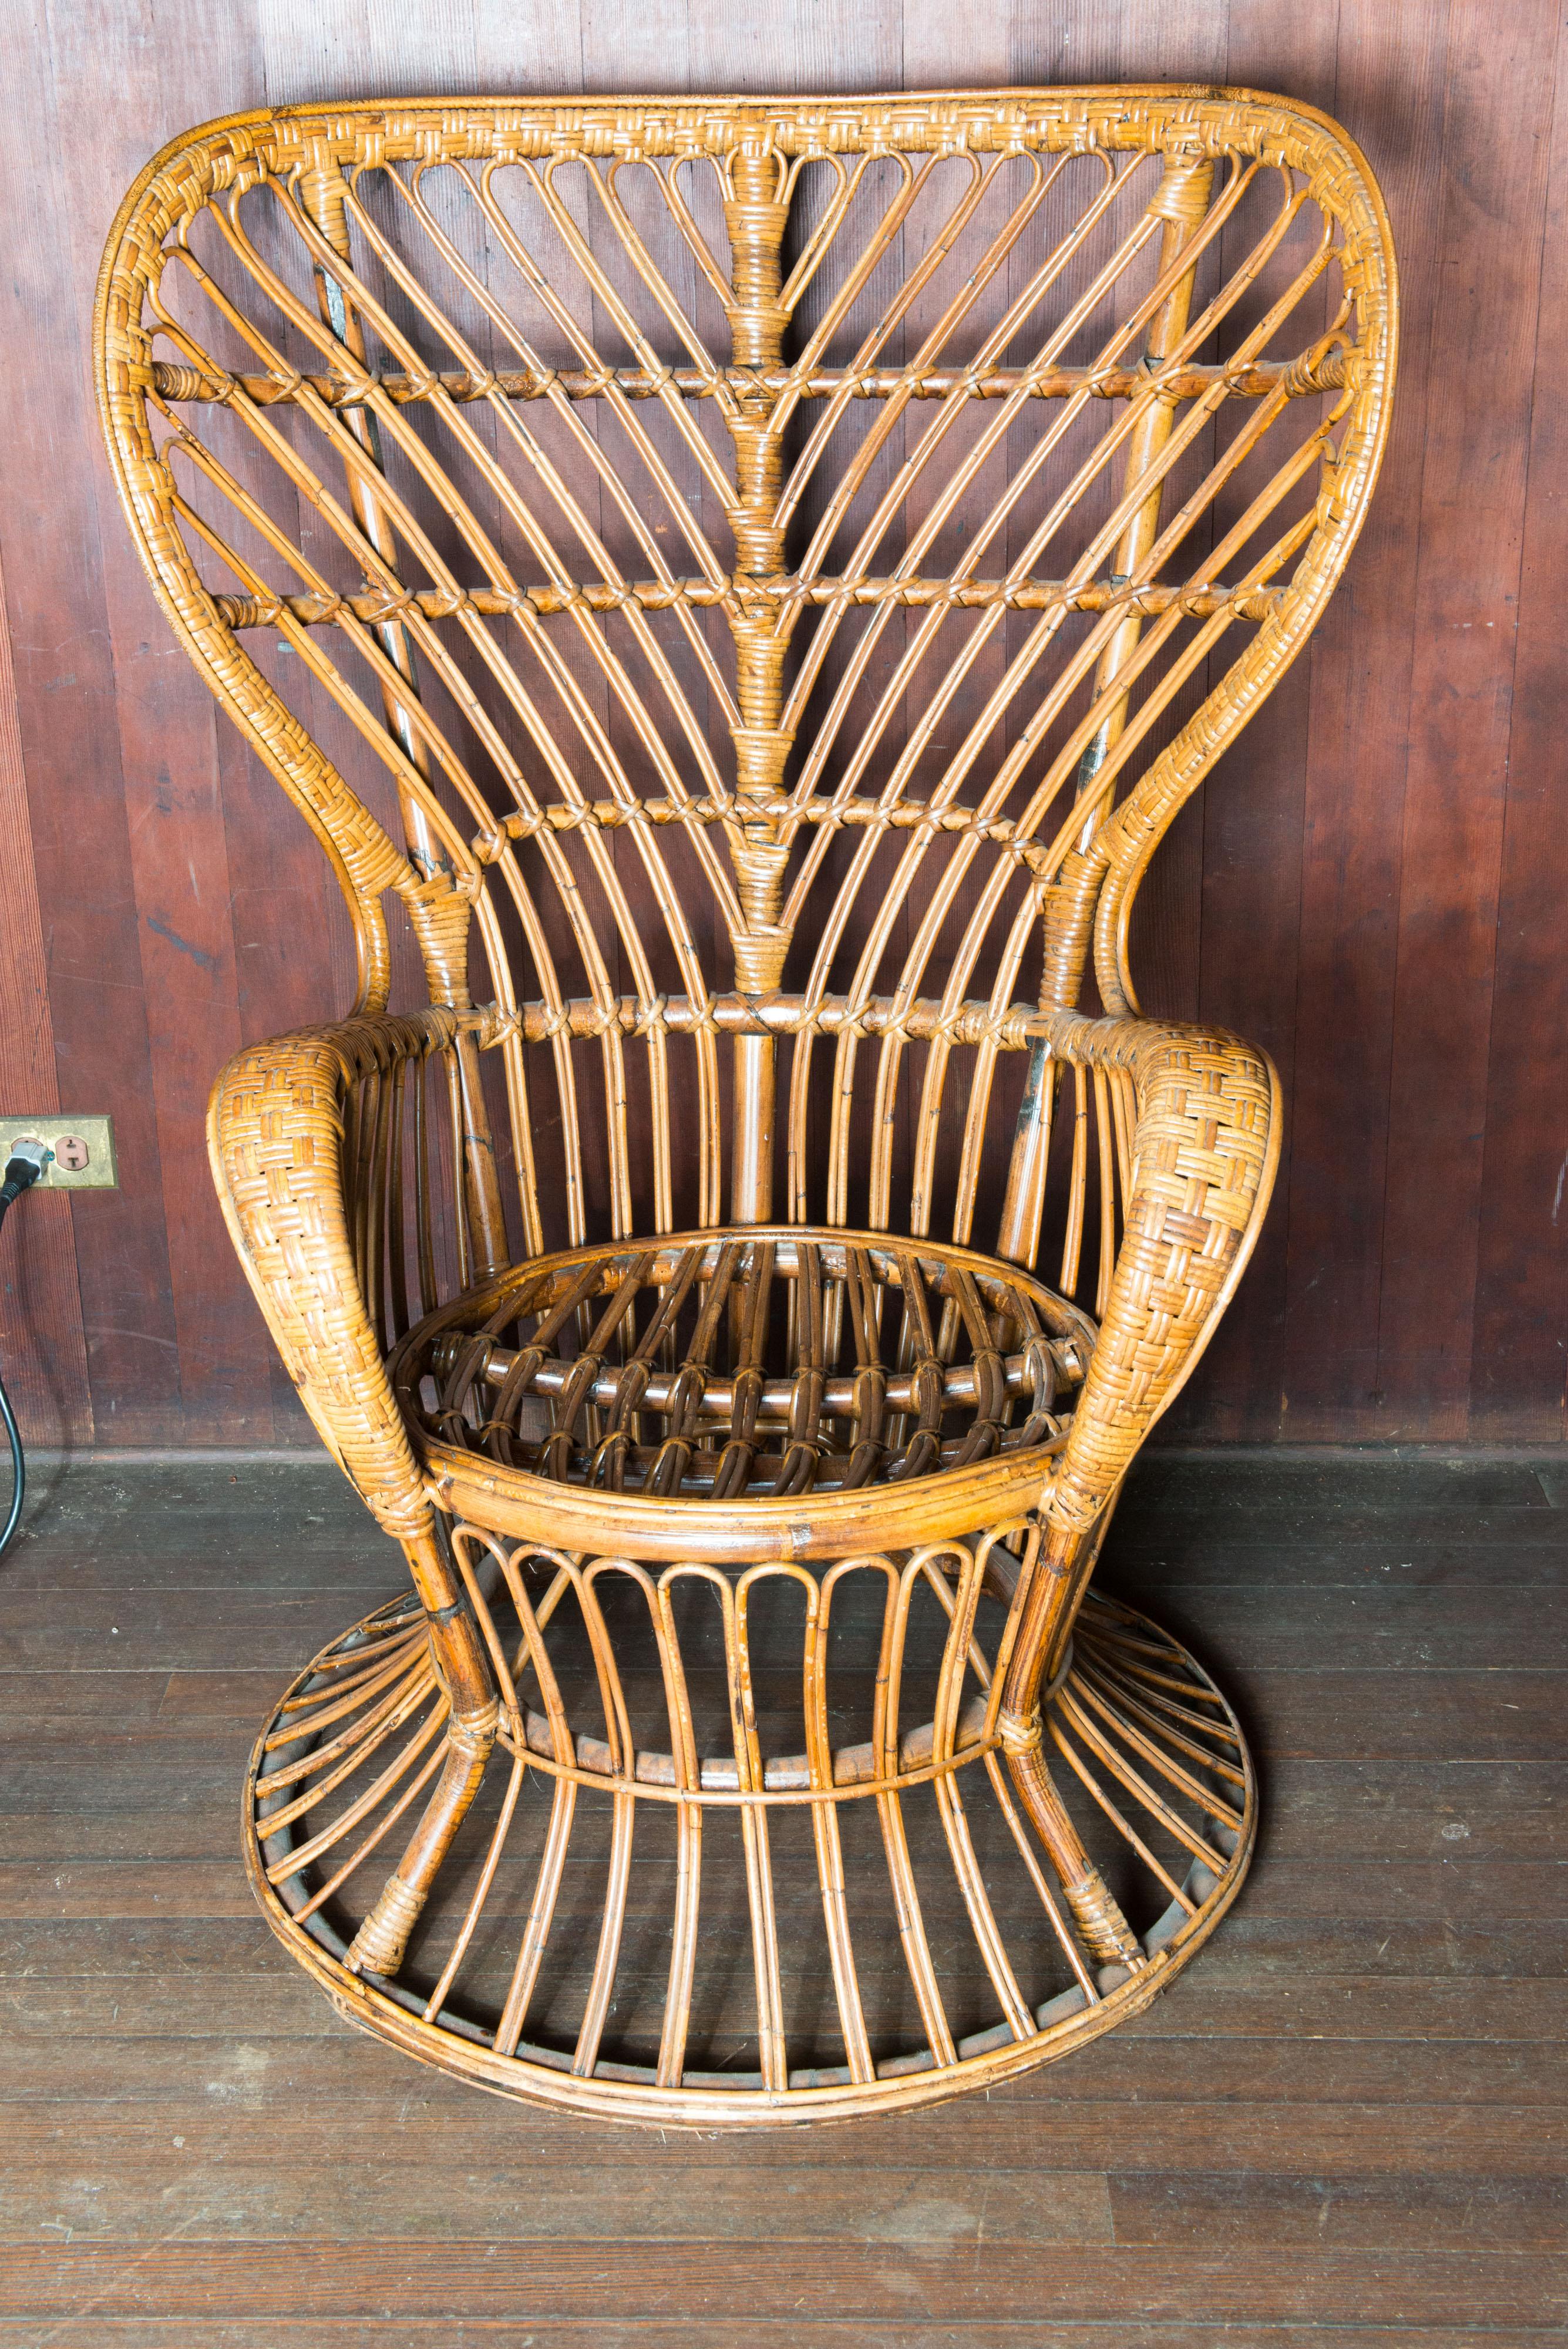 Mid-Century Modern vintage rattan wingback arm chair in the style of the Gio Ponti chair designed circa 1948 in Italy and in production in the 1950s. This chair is in exceptionally good condition. Purchased in Paris.
Seat: 20